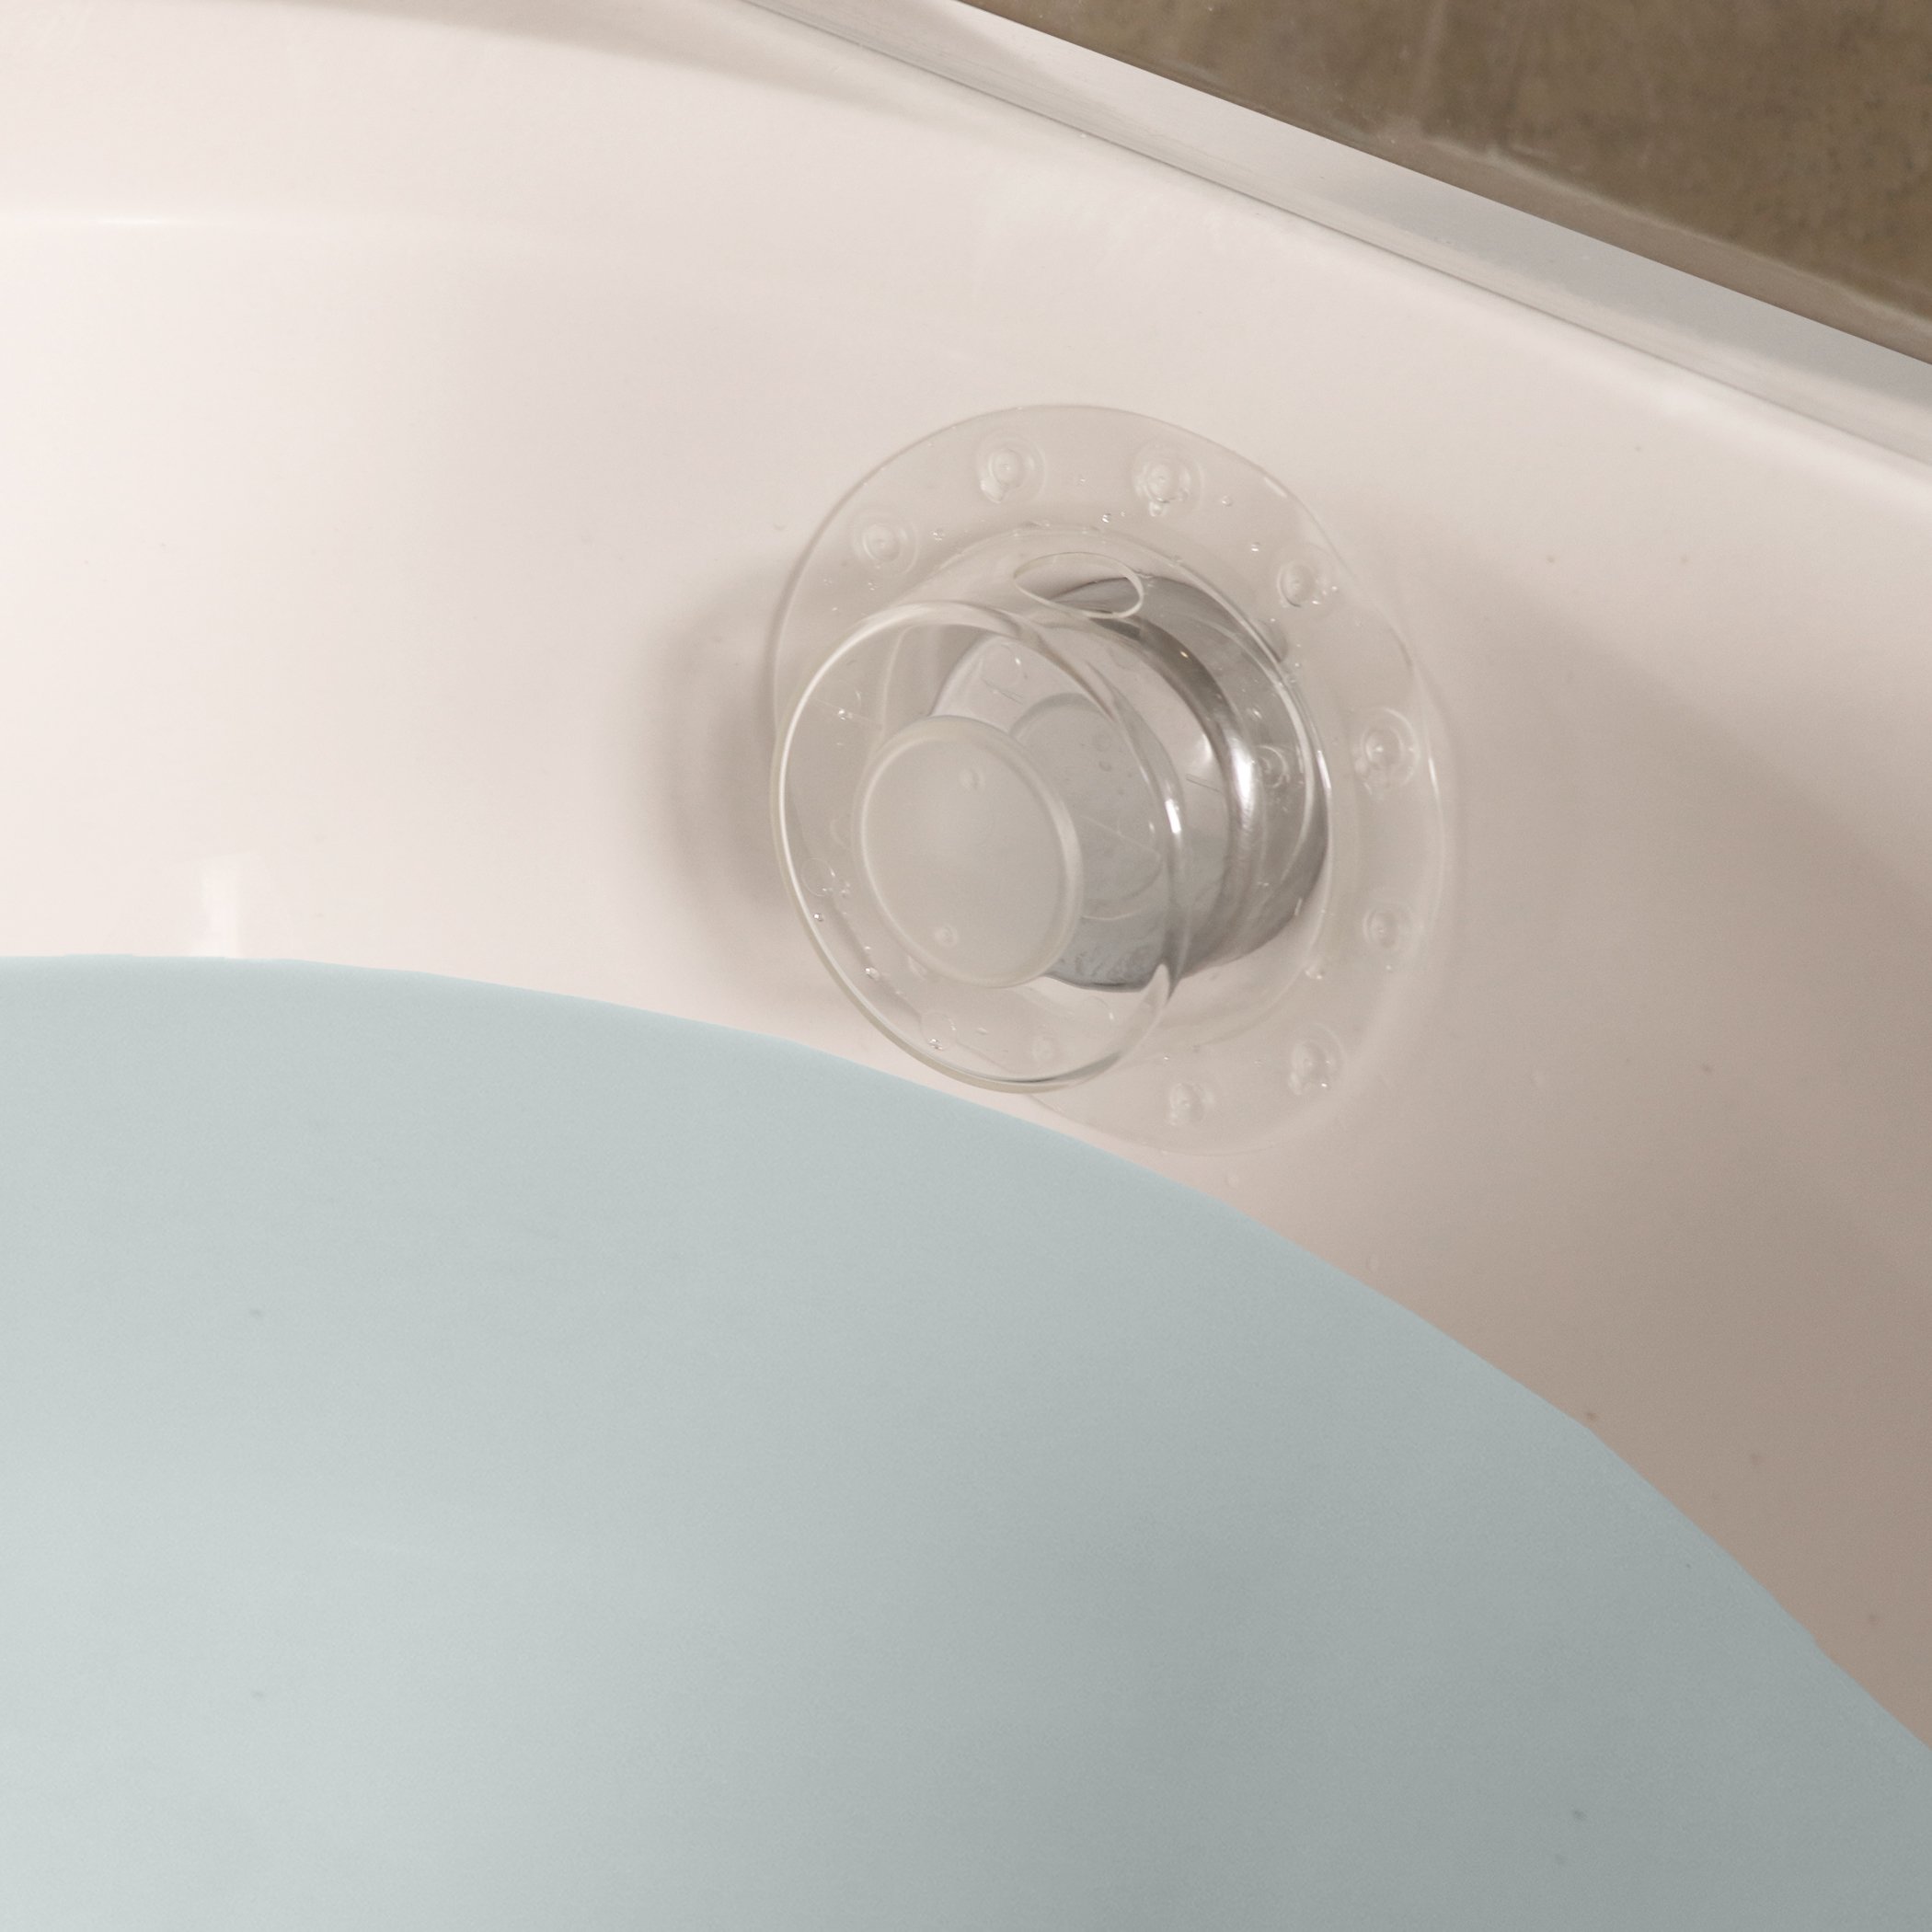 Bathtub Overflow Drain Cover Tub - Silicone Bathroom Overflow Drain Cover,  Bath Tub Overflow Cover, Bathroom Spa Accessories, Adds Inches of Water for